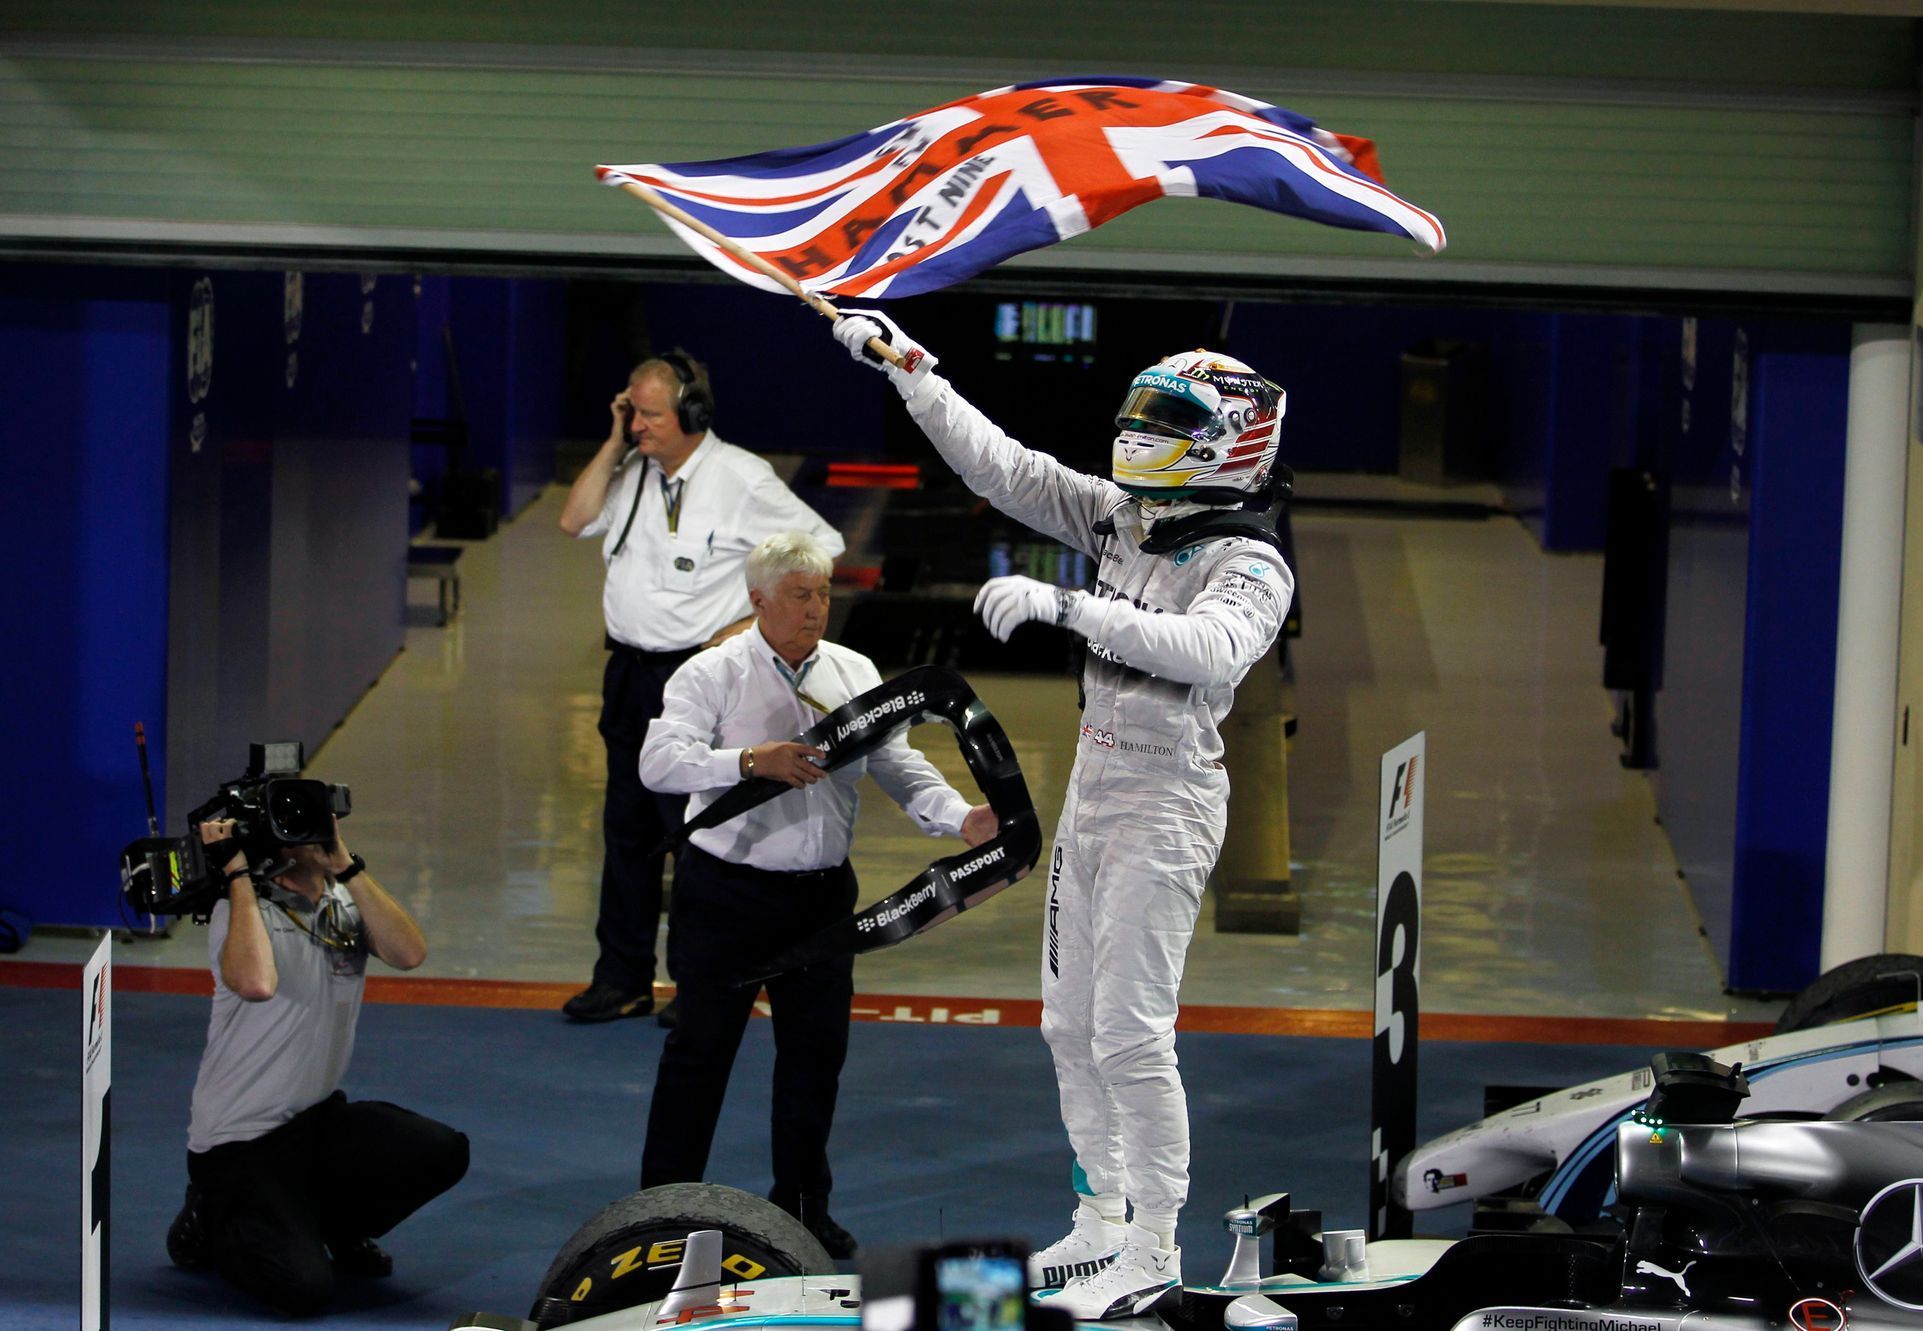 Mercedes Formula One driver Lewis Hamilton of Britain waves the Union flag, commonly known as the Union Jack, in celebration as he enters the pit lane after winning the Abu Dhabi F1 Grand Prix at the